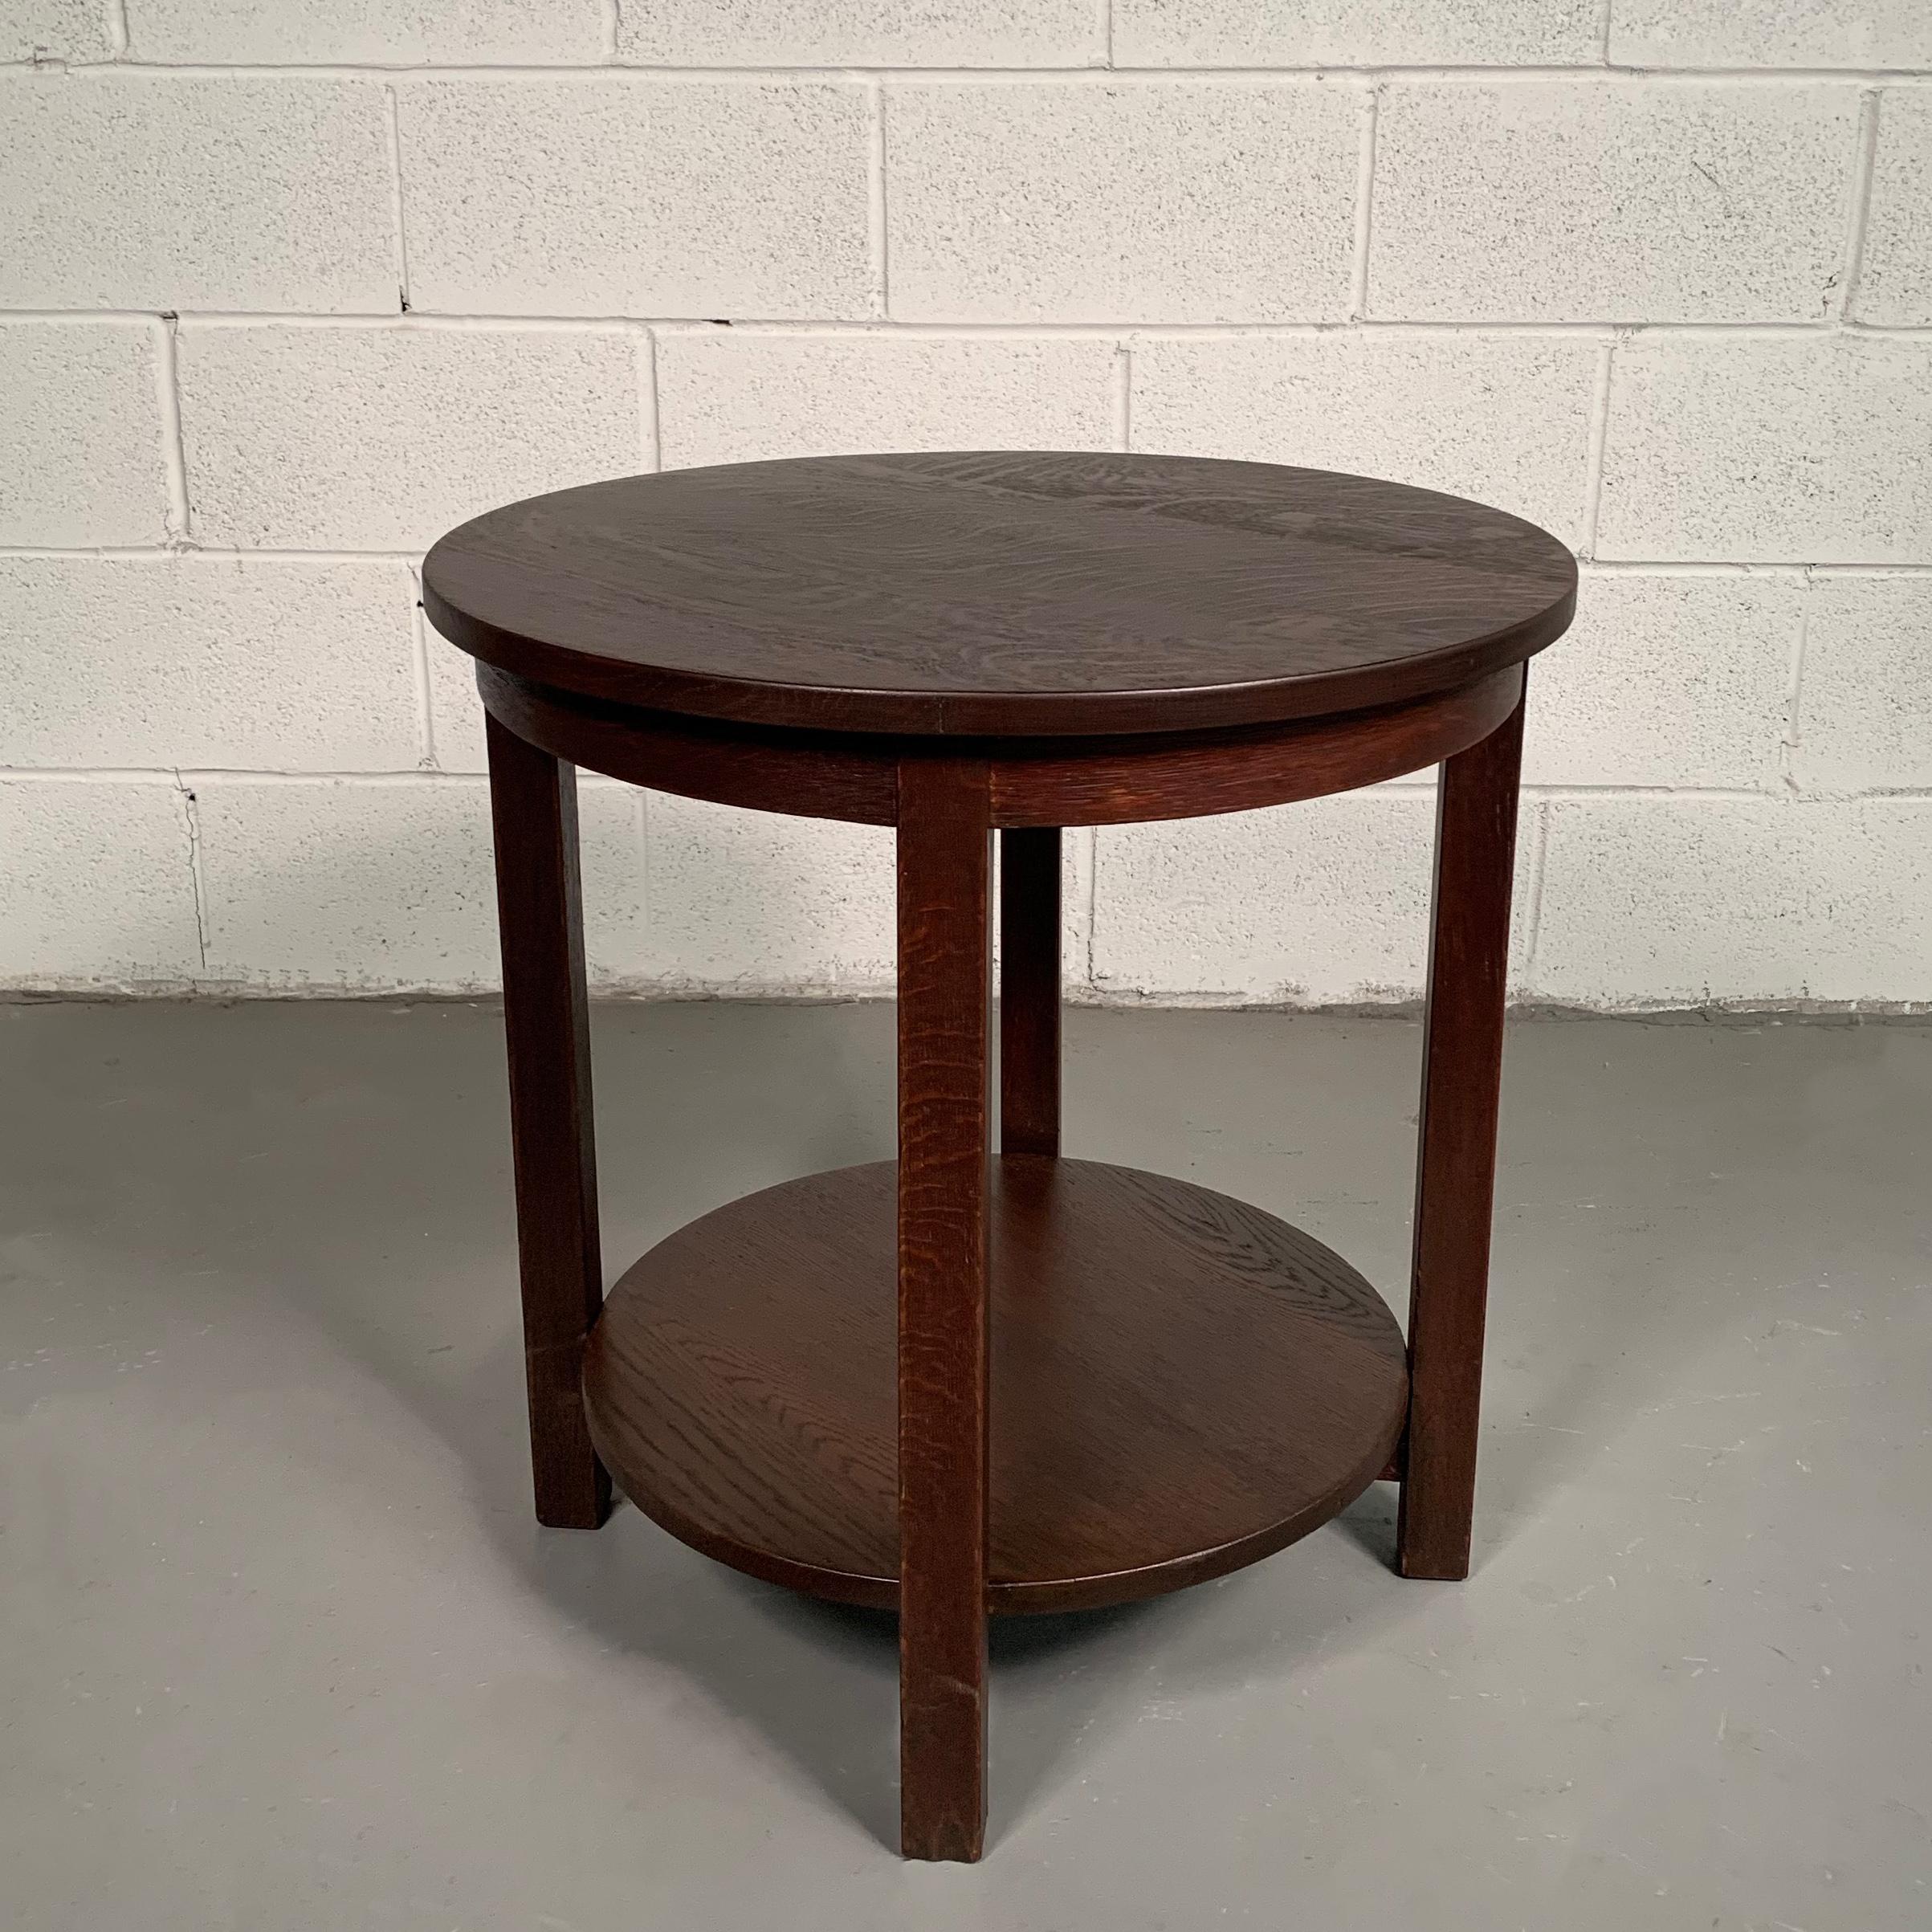 Early 20th century, craftsman, round, tiered, quarter sawn oak, side or center table by Stickley features a bottom level at 5.5 inches height. The table retains a partial paper Stickley label.